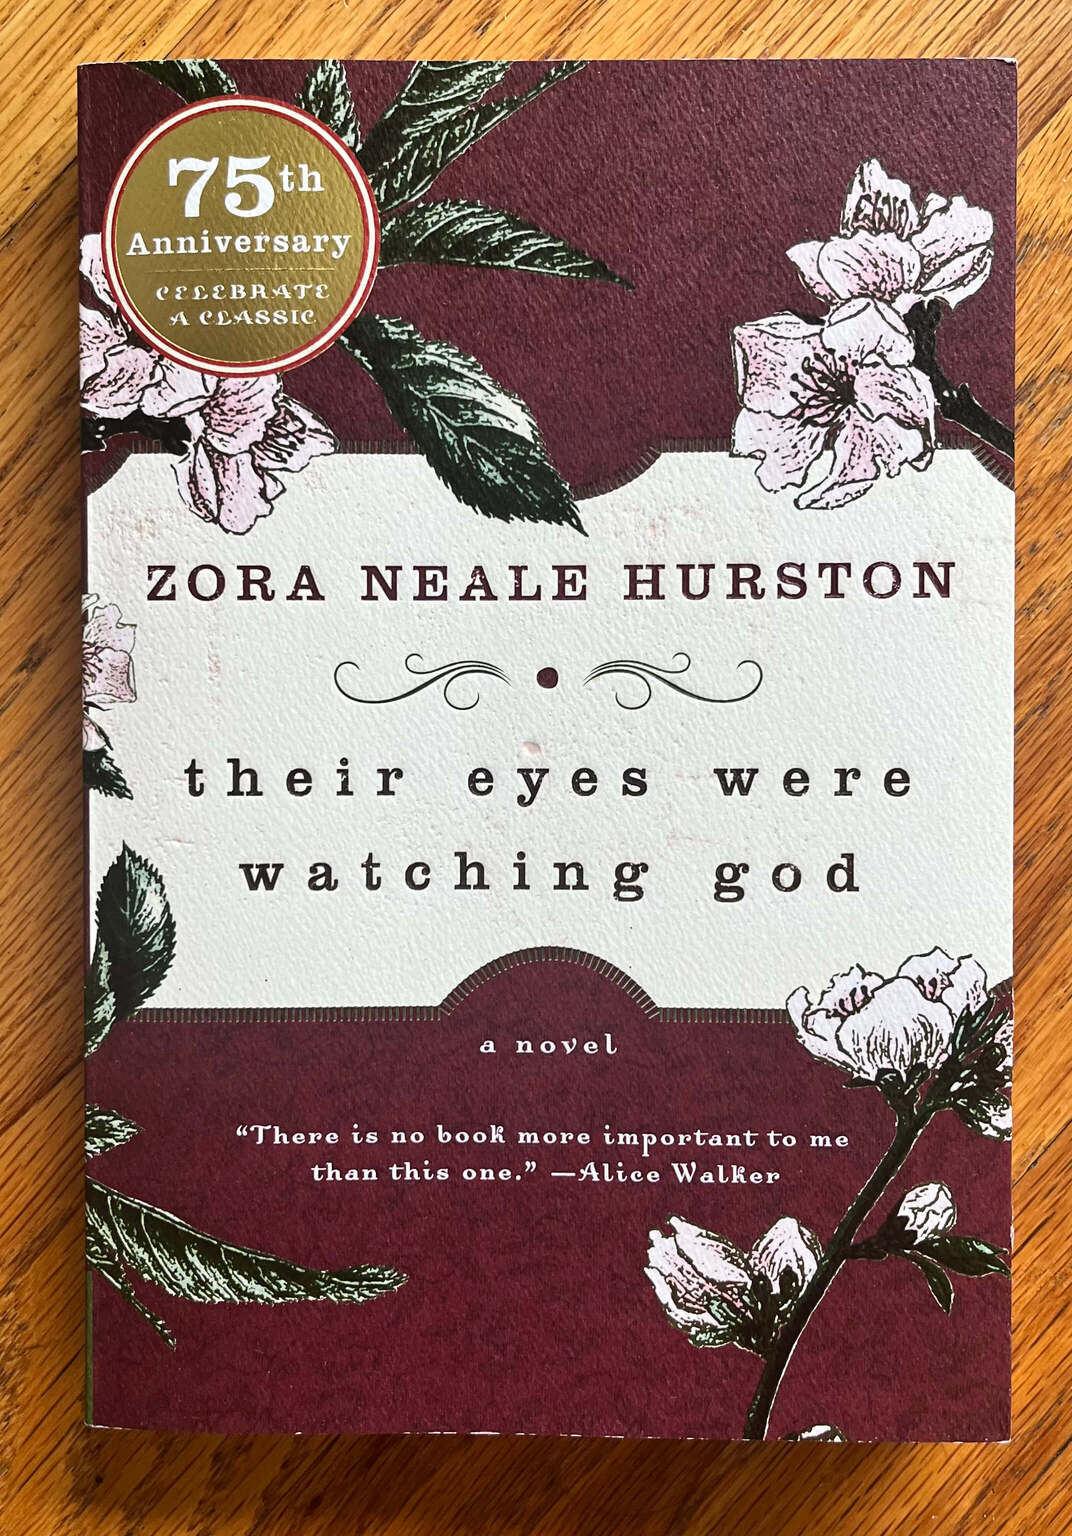 “their eyes were watching god: a novel” by Zora Neale Hurston. “There is no book more important to me than this one.” - Alice Walker